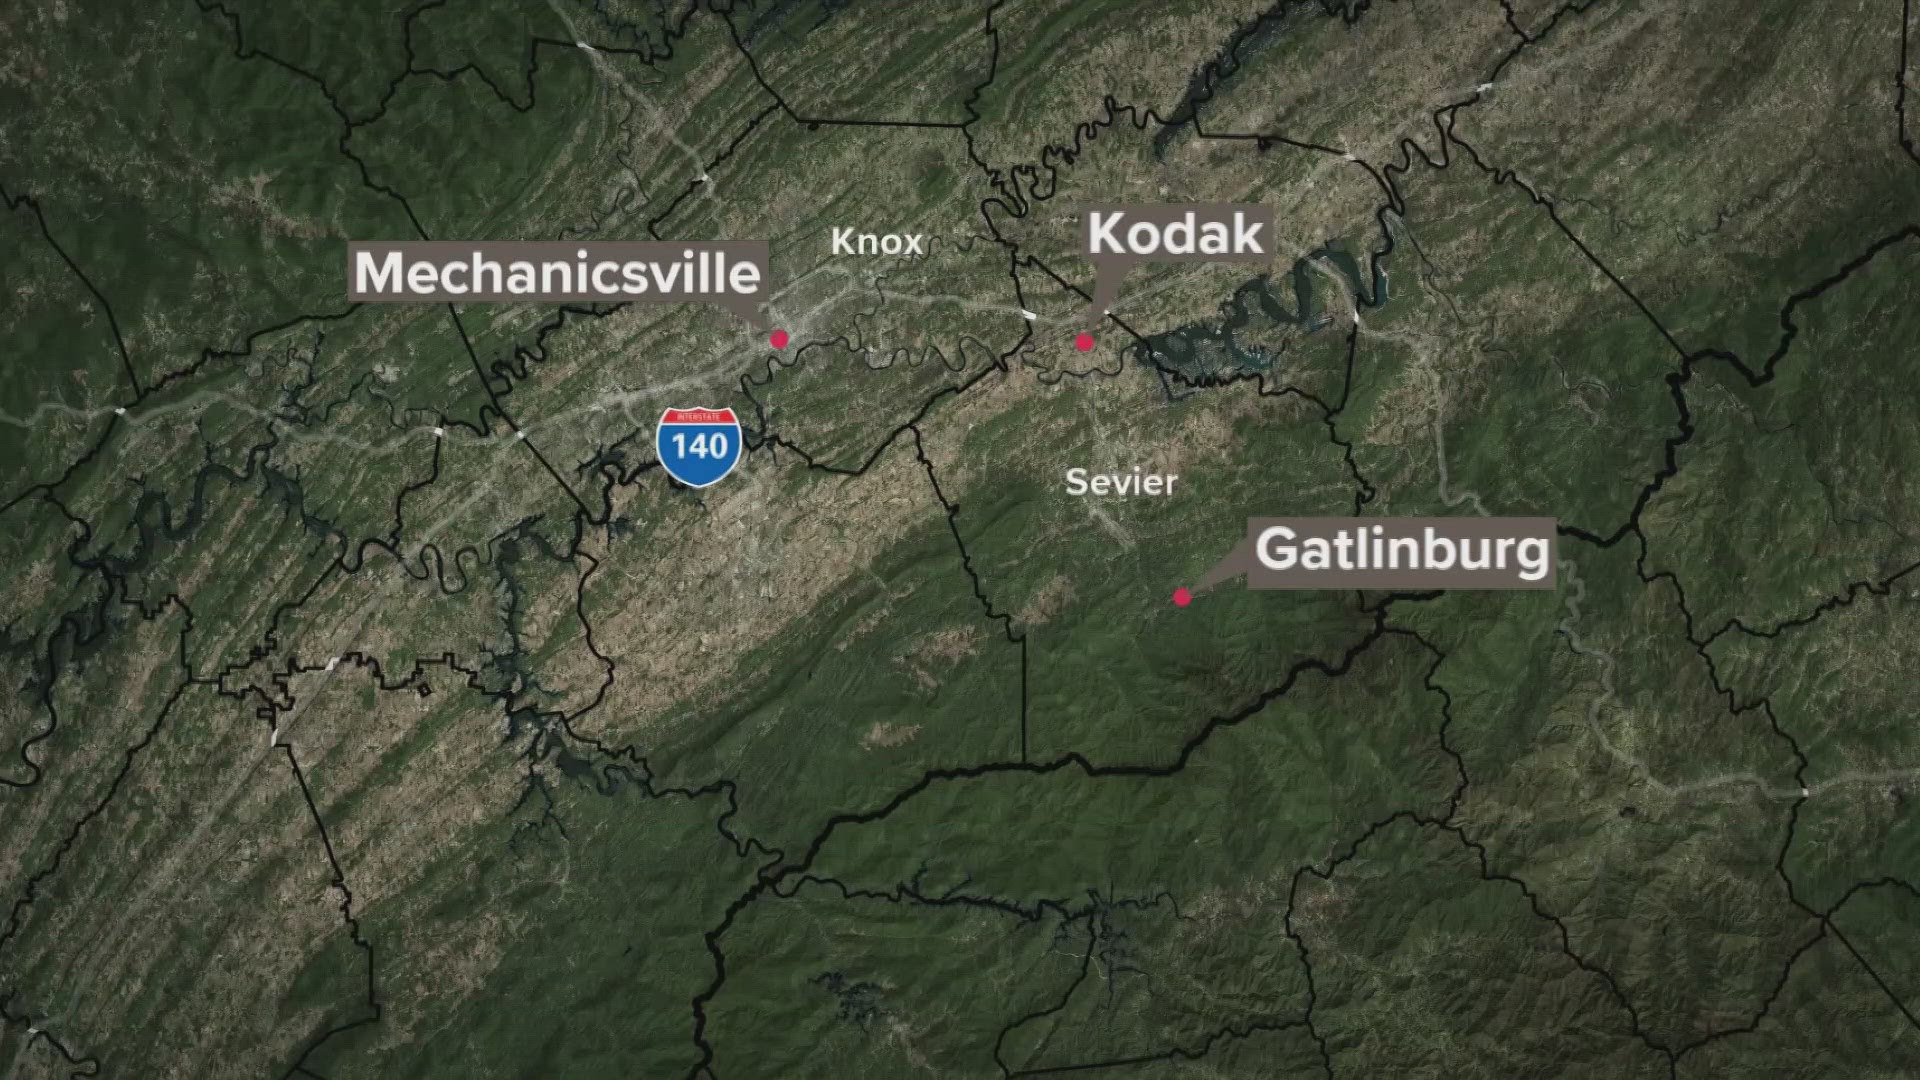 According to a statement from Food City, a card skimmer was found at the Kodak, Gatlinburg and Mechanicsville locations.